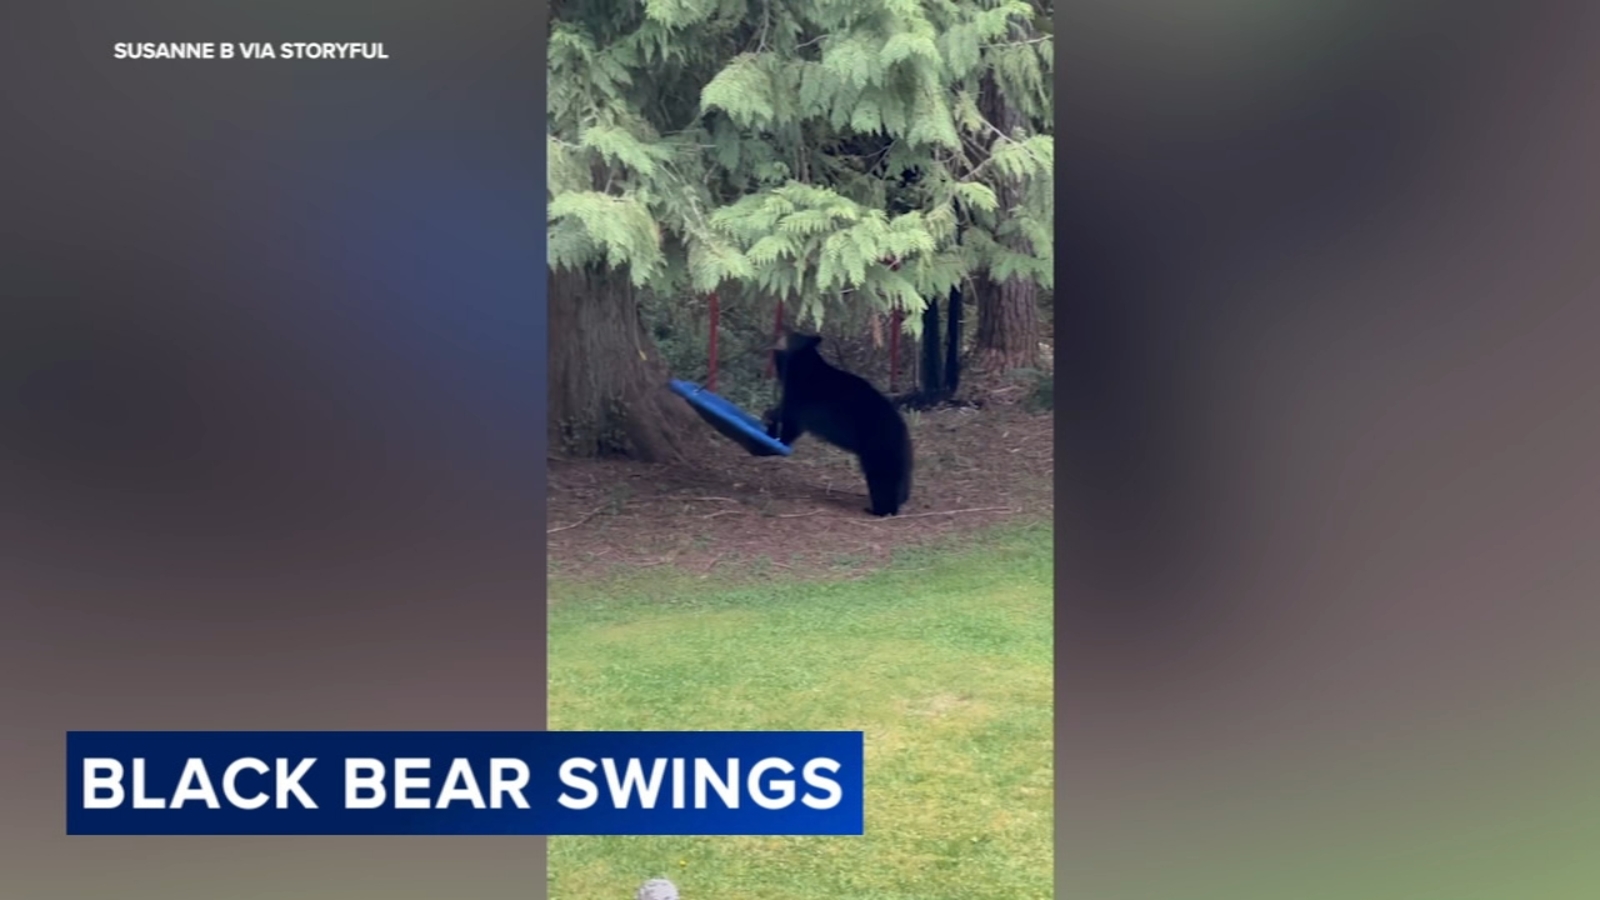 Black bear and cub play on swing in garden in British Columbia, Canada [Video]